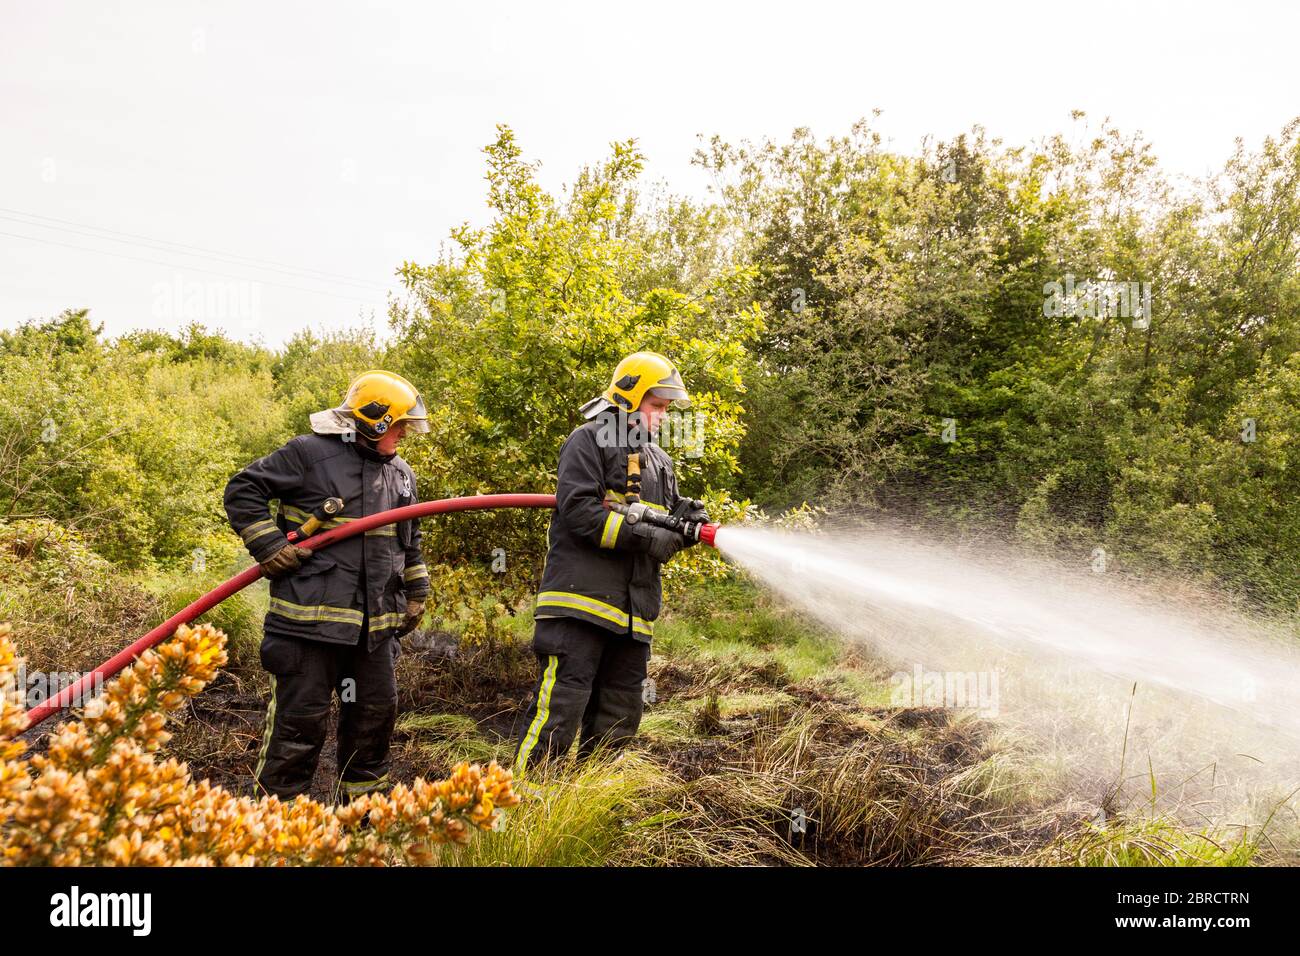 Carrigaline, Cork, Ireland. 20th May, 2020. Two units of the Fire brigade   extinguish a gorse fire that took place on waste ground outside the town of Carrigaline, Co. Cork, Ireland.  - Credit; David Creedon / Alamy Live News Stock Photo